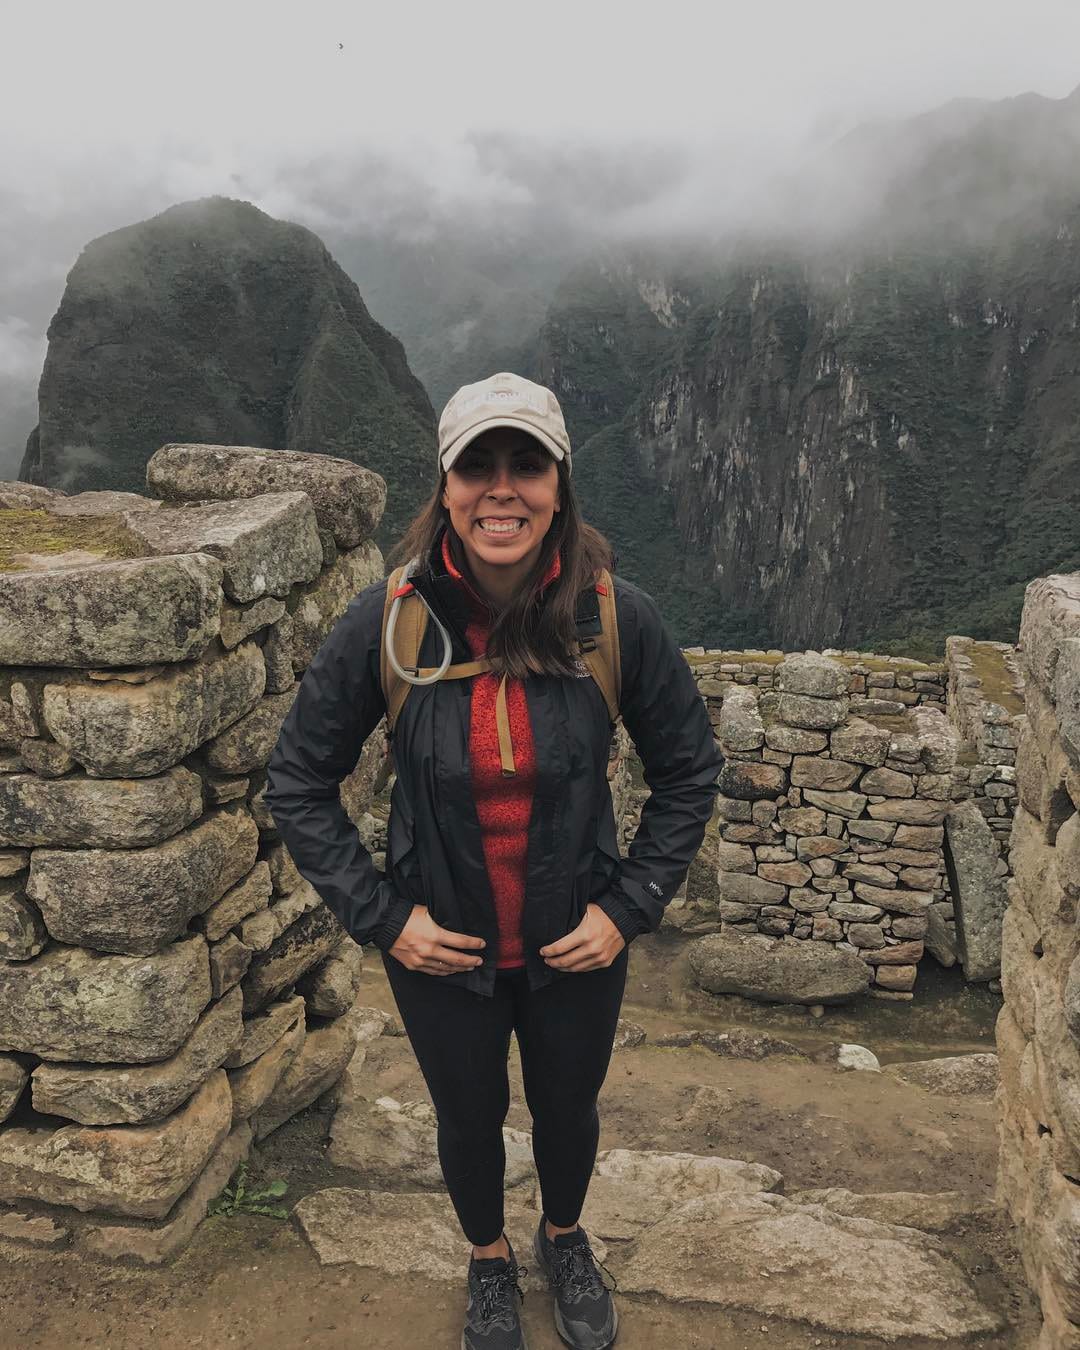 Amy in her hiking gear in Peruvian mountains